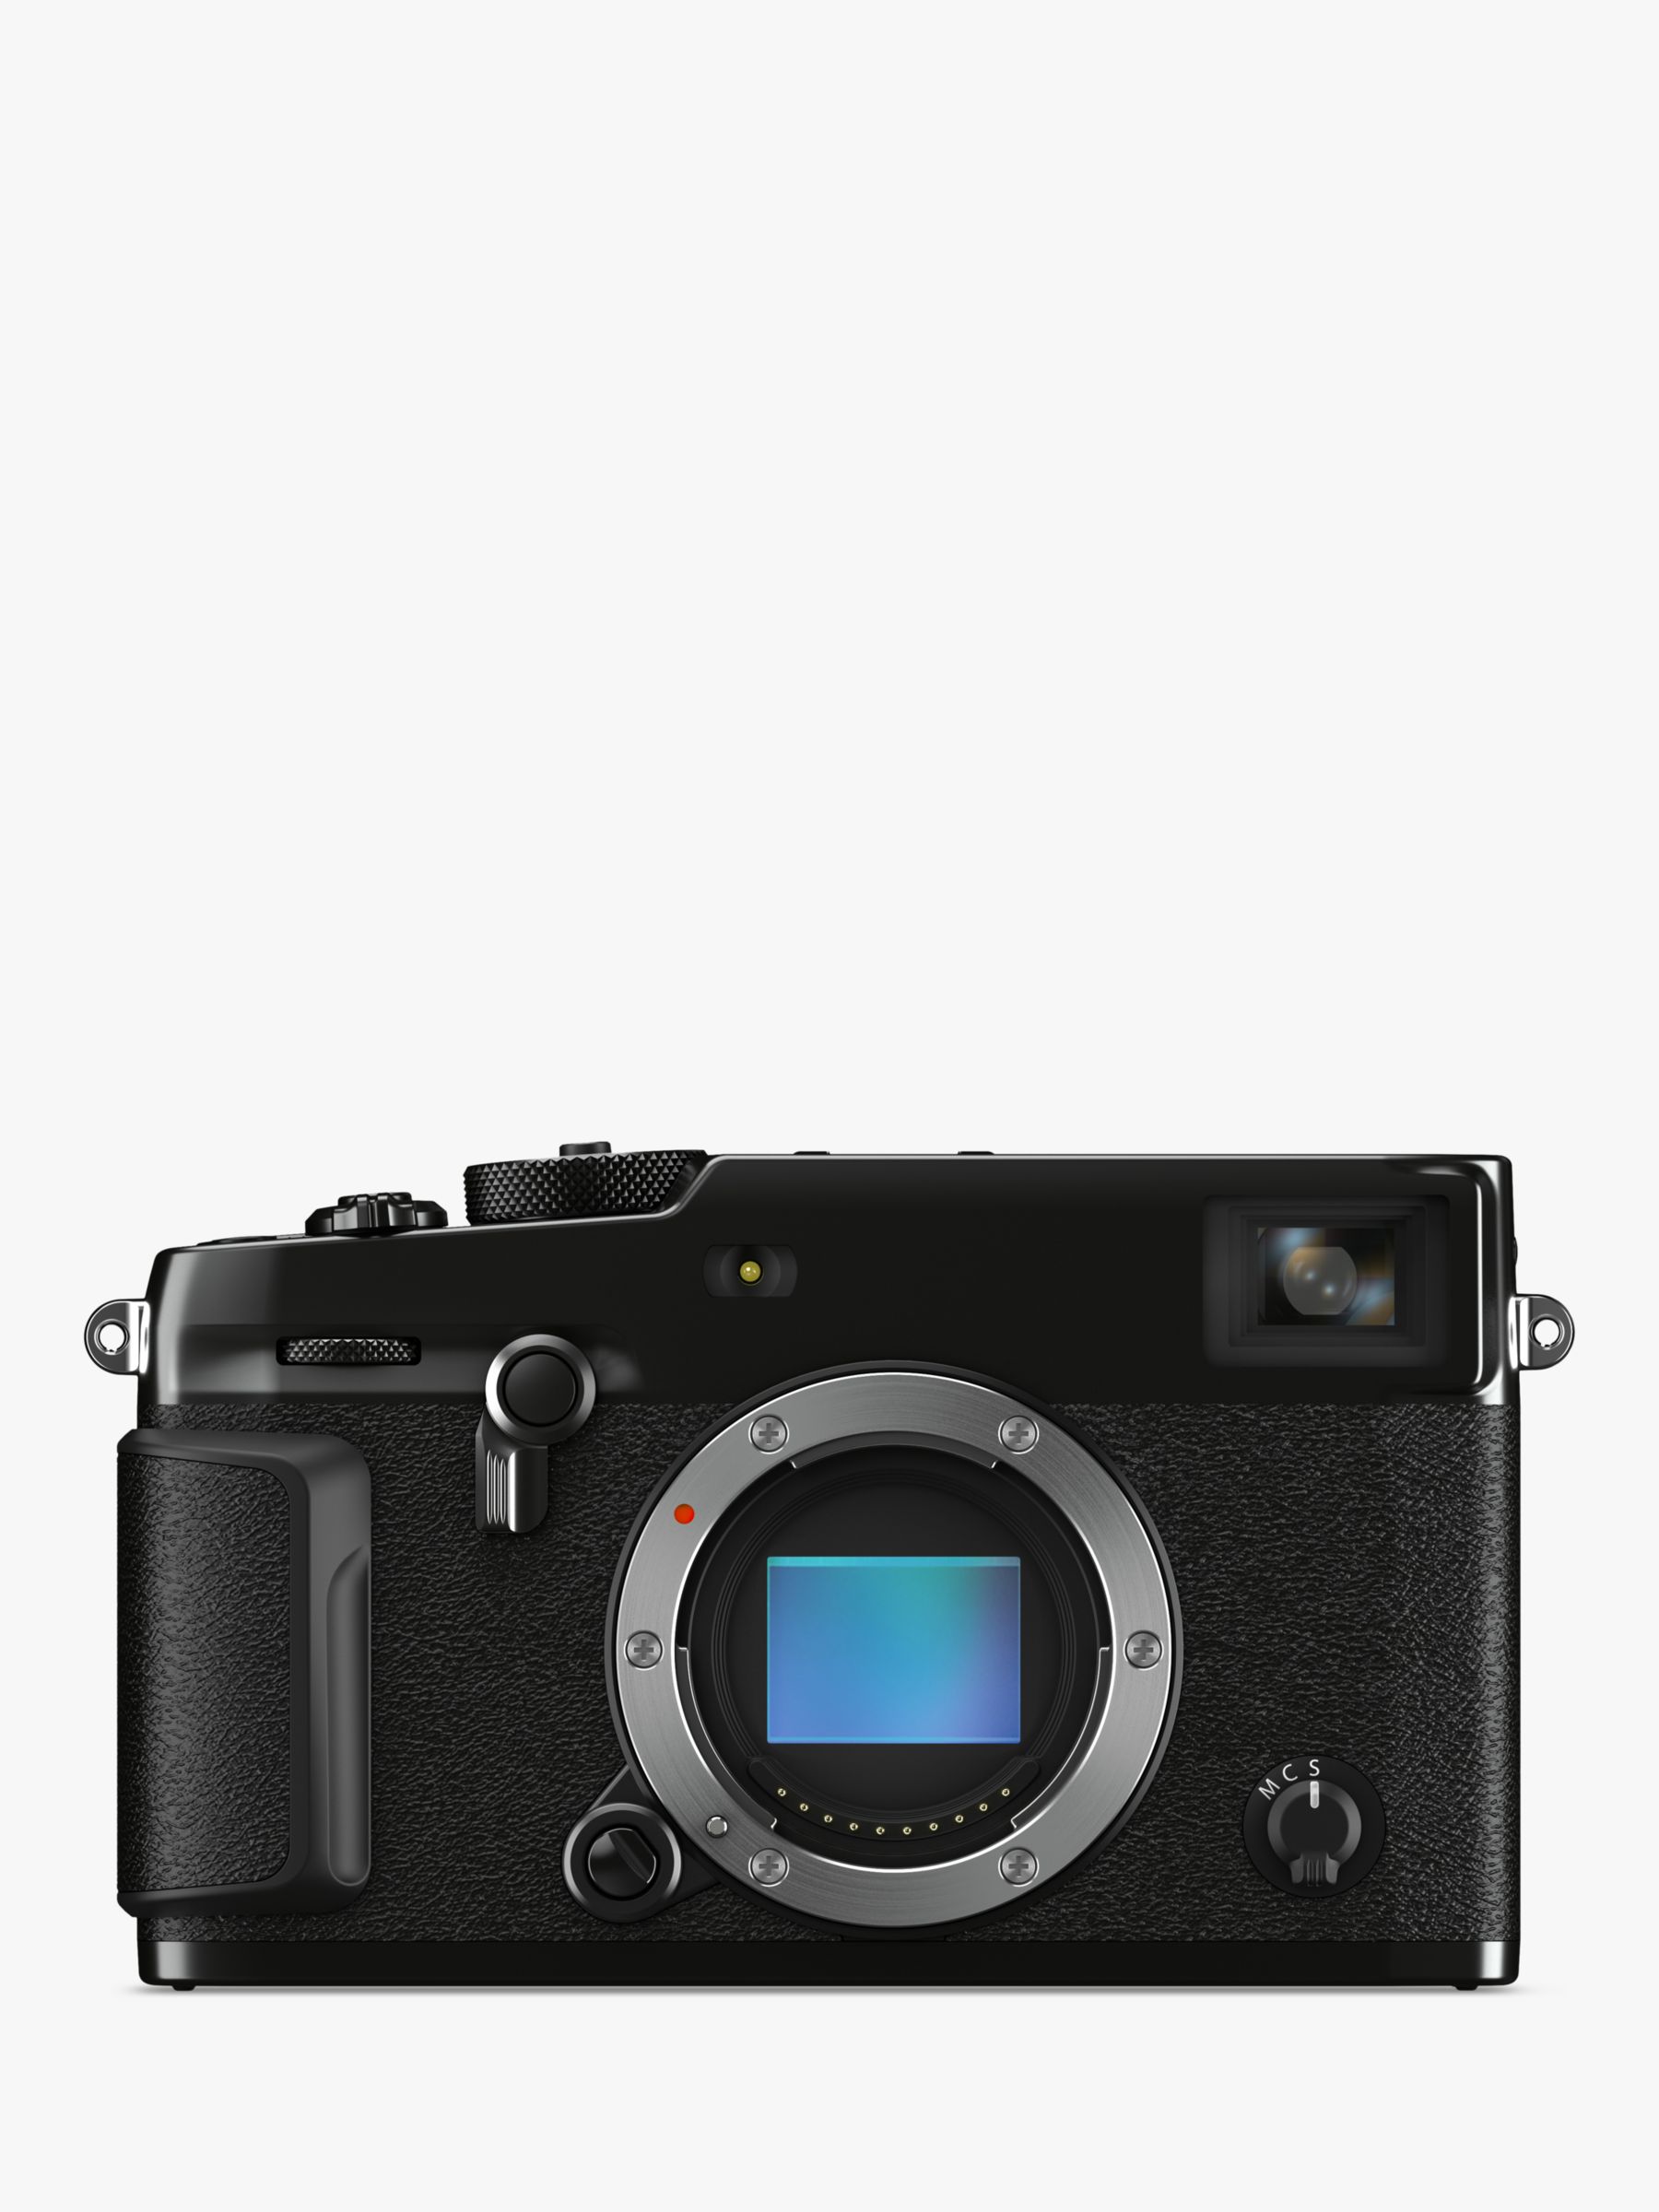 Image of Fujifilm XPro 3 Compact System Camera 4K Ultra HD 261MP WiFi Bluetooth EVF OVF 3 LCD Tilting Touch Screen Body Only Black